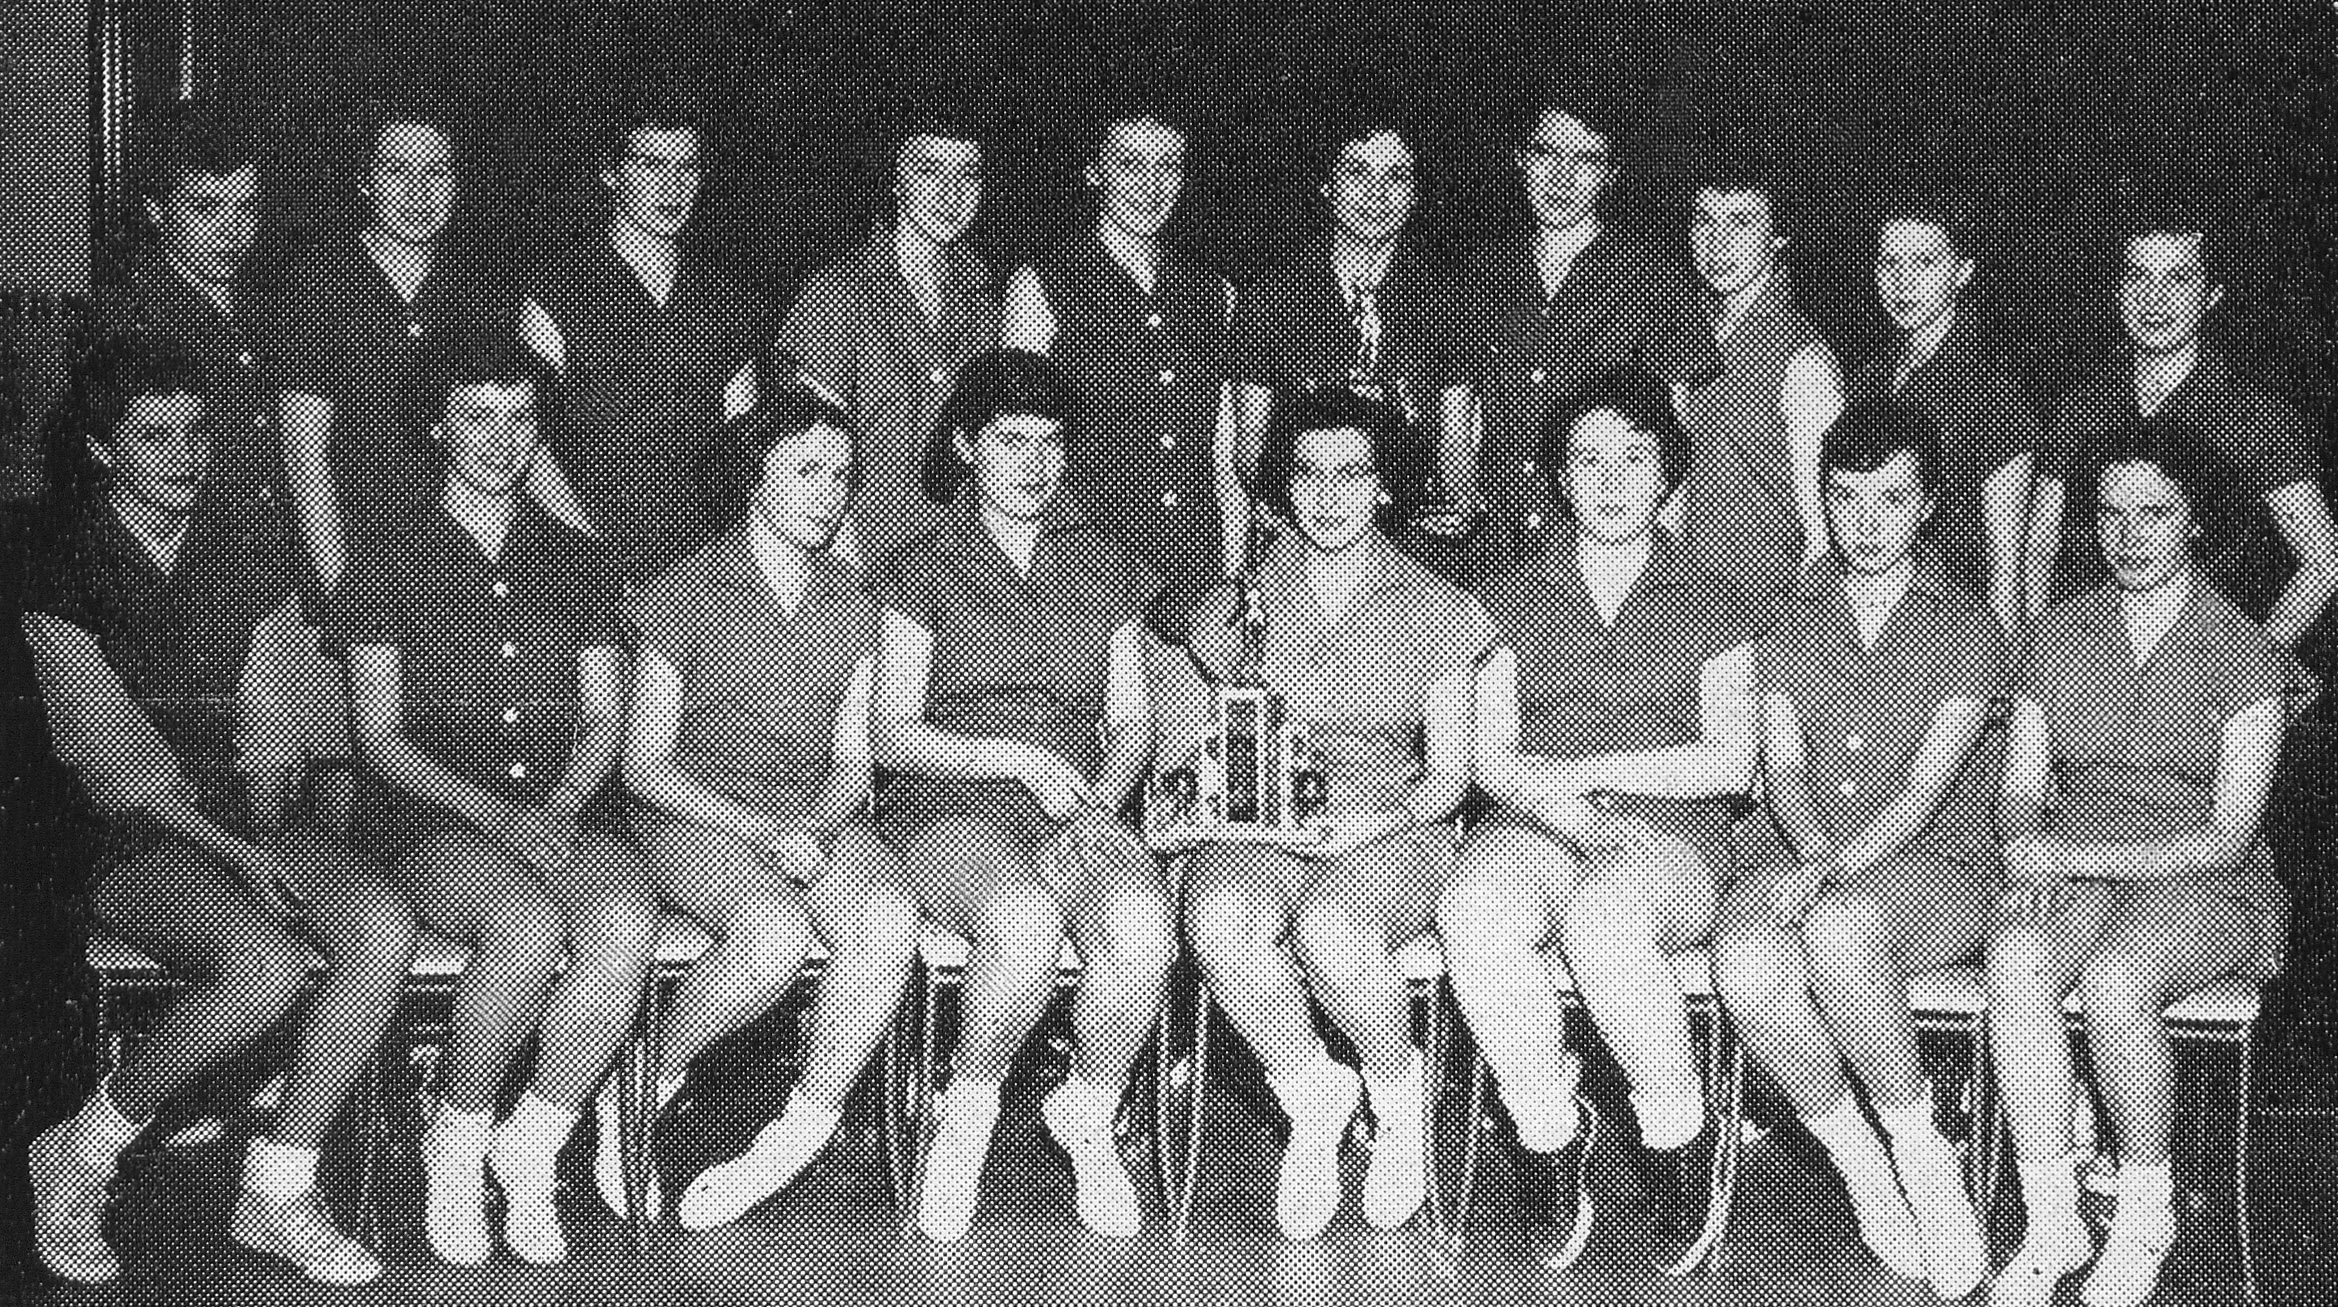 (Click to magnify)  FRONT ROW:  (Junior) J. Richardson, l. Chase, B. Curl, B. Lonsdale, E. Whitty(Captain), D. Comer, M. Kydd, D. Marnien
BACK ROW:  (Senior)  J. Snoddon, B. Noble, S. Drummond, B. Risebrough, D. Whitney, D. Montgomery, (Captain), J. Kydd